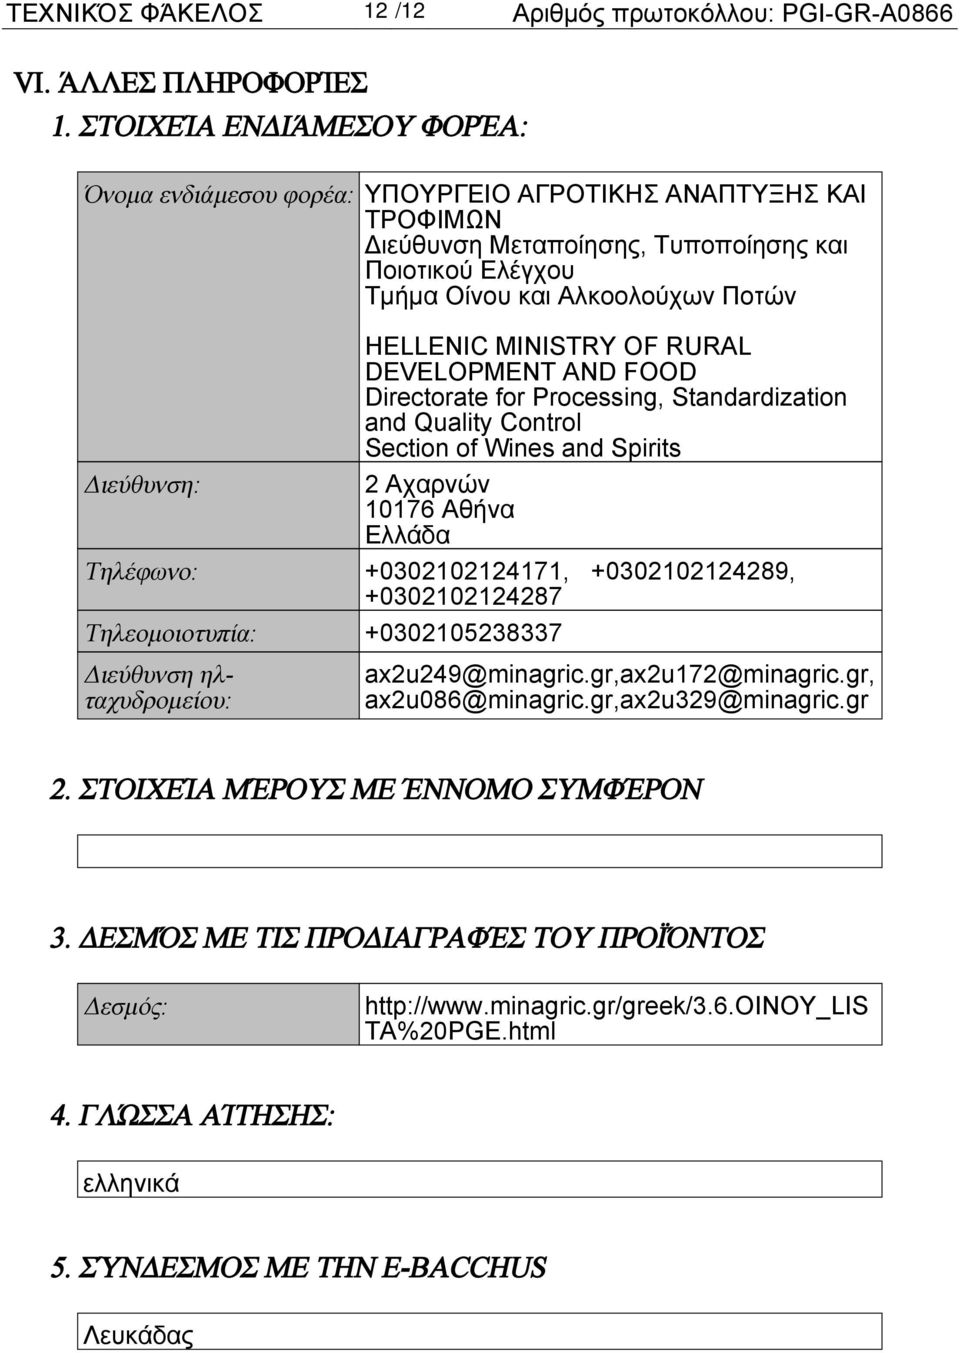 MINISTRY OF RURAL DEVELOPMENT AND FOOD Directorate for Processing, Standardization and Quality Control Section of Wines and Spirits 2 Αχαρνών 10176 Αθήνα Τηλέφωνο: +0302102124171, +0302102124289,